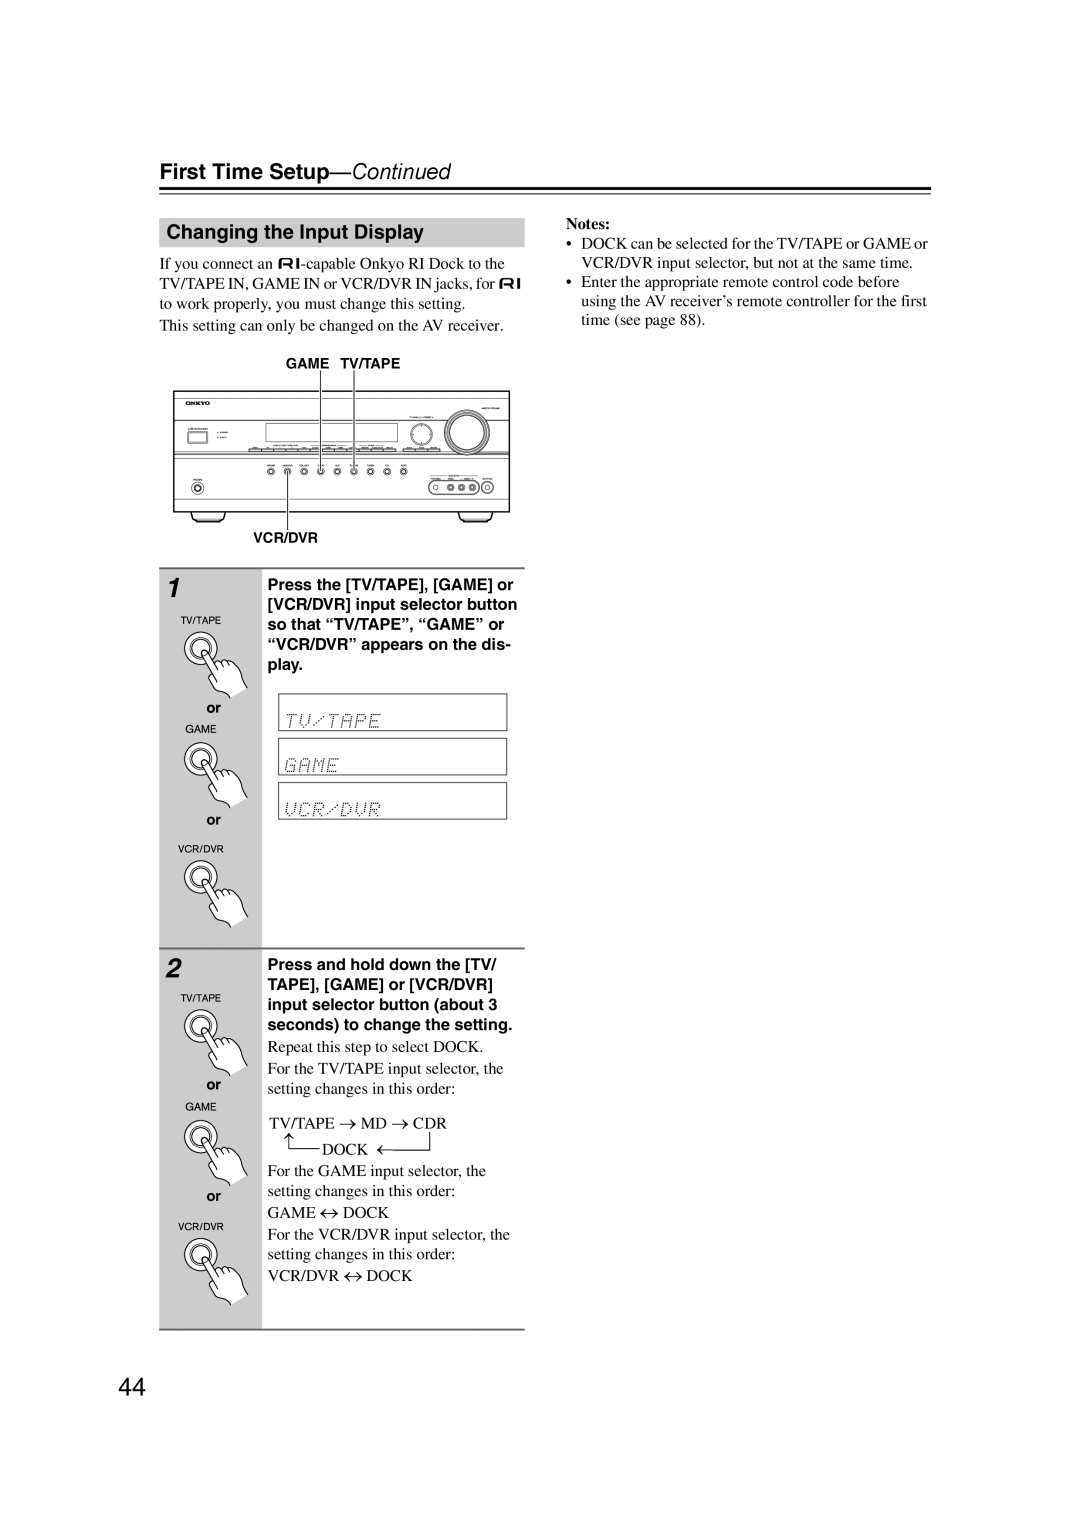 Onkyo HT-RC160 instruction manual Changing the Input Display, Notes 